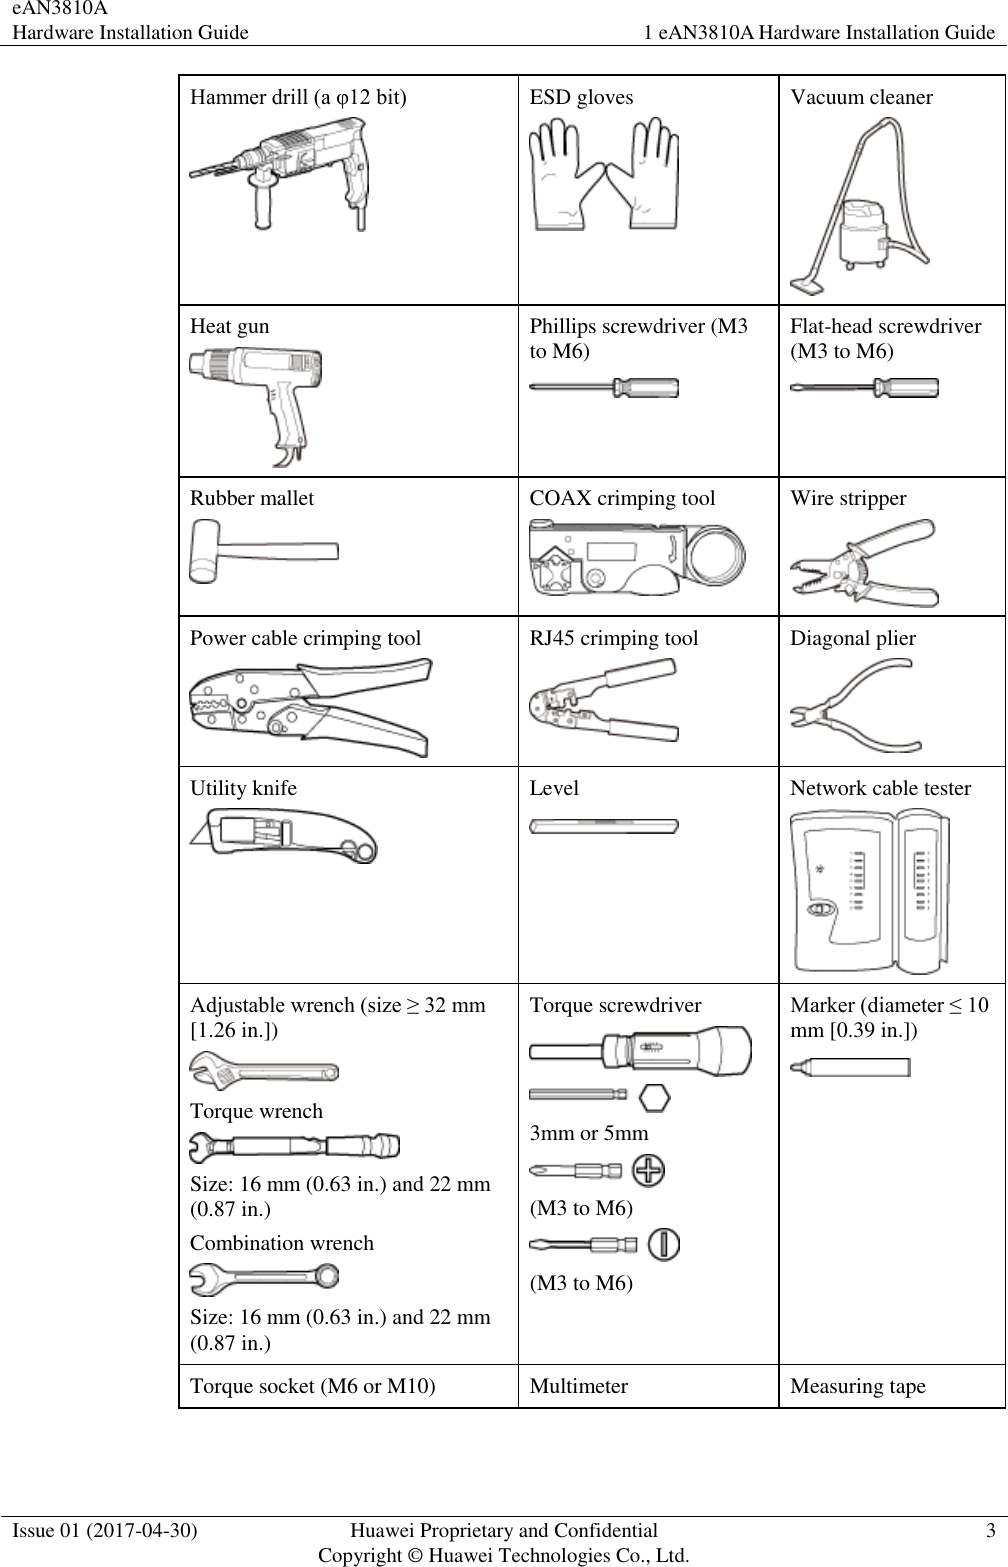 eAN3810A   Hardware Installation Guide 1 eAN3810A Hardware Installation Guide  Issue 01 (2017-04-30) Huawei Proprietary and Confidential                                     Copyright © Huawei Technologies Co., Ltd. 3  Hammer drill (a φ12 bit)    ESD gloves  Vacuum cleaner  Heat gun  Phillips screwdriver (M3 to M6)  Flat-head screwdriver (M3 to M6)  Rubber mallet  COAX crimping tool  Wire stripper  Power cable crimping tool  RJ45 crimping tool  Diagonal plier  Utility knife  Level  Network cable tester  Adjustable wrench (size ≥ 32 mm [1.26 in.])  Torque wrench  Size: 16 mm (0.63 in.) and 22 mm (0.87 in.) Combination wrench  Size: 16 mm (0.63 in.) and 22 mm (0.87 in.) Torque screwdriver   3mm or 5mm  (M3 to M6)  (M3 to M6) Marker (diameter ≤ 10 mm [0.39 in.])    Torque socket (M6 or M10) Multimeter Measuring tape 